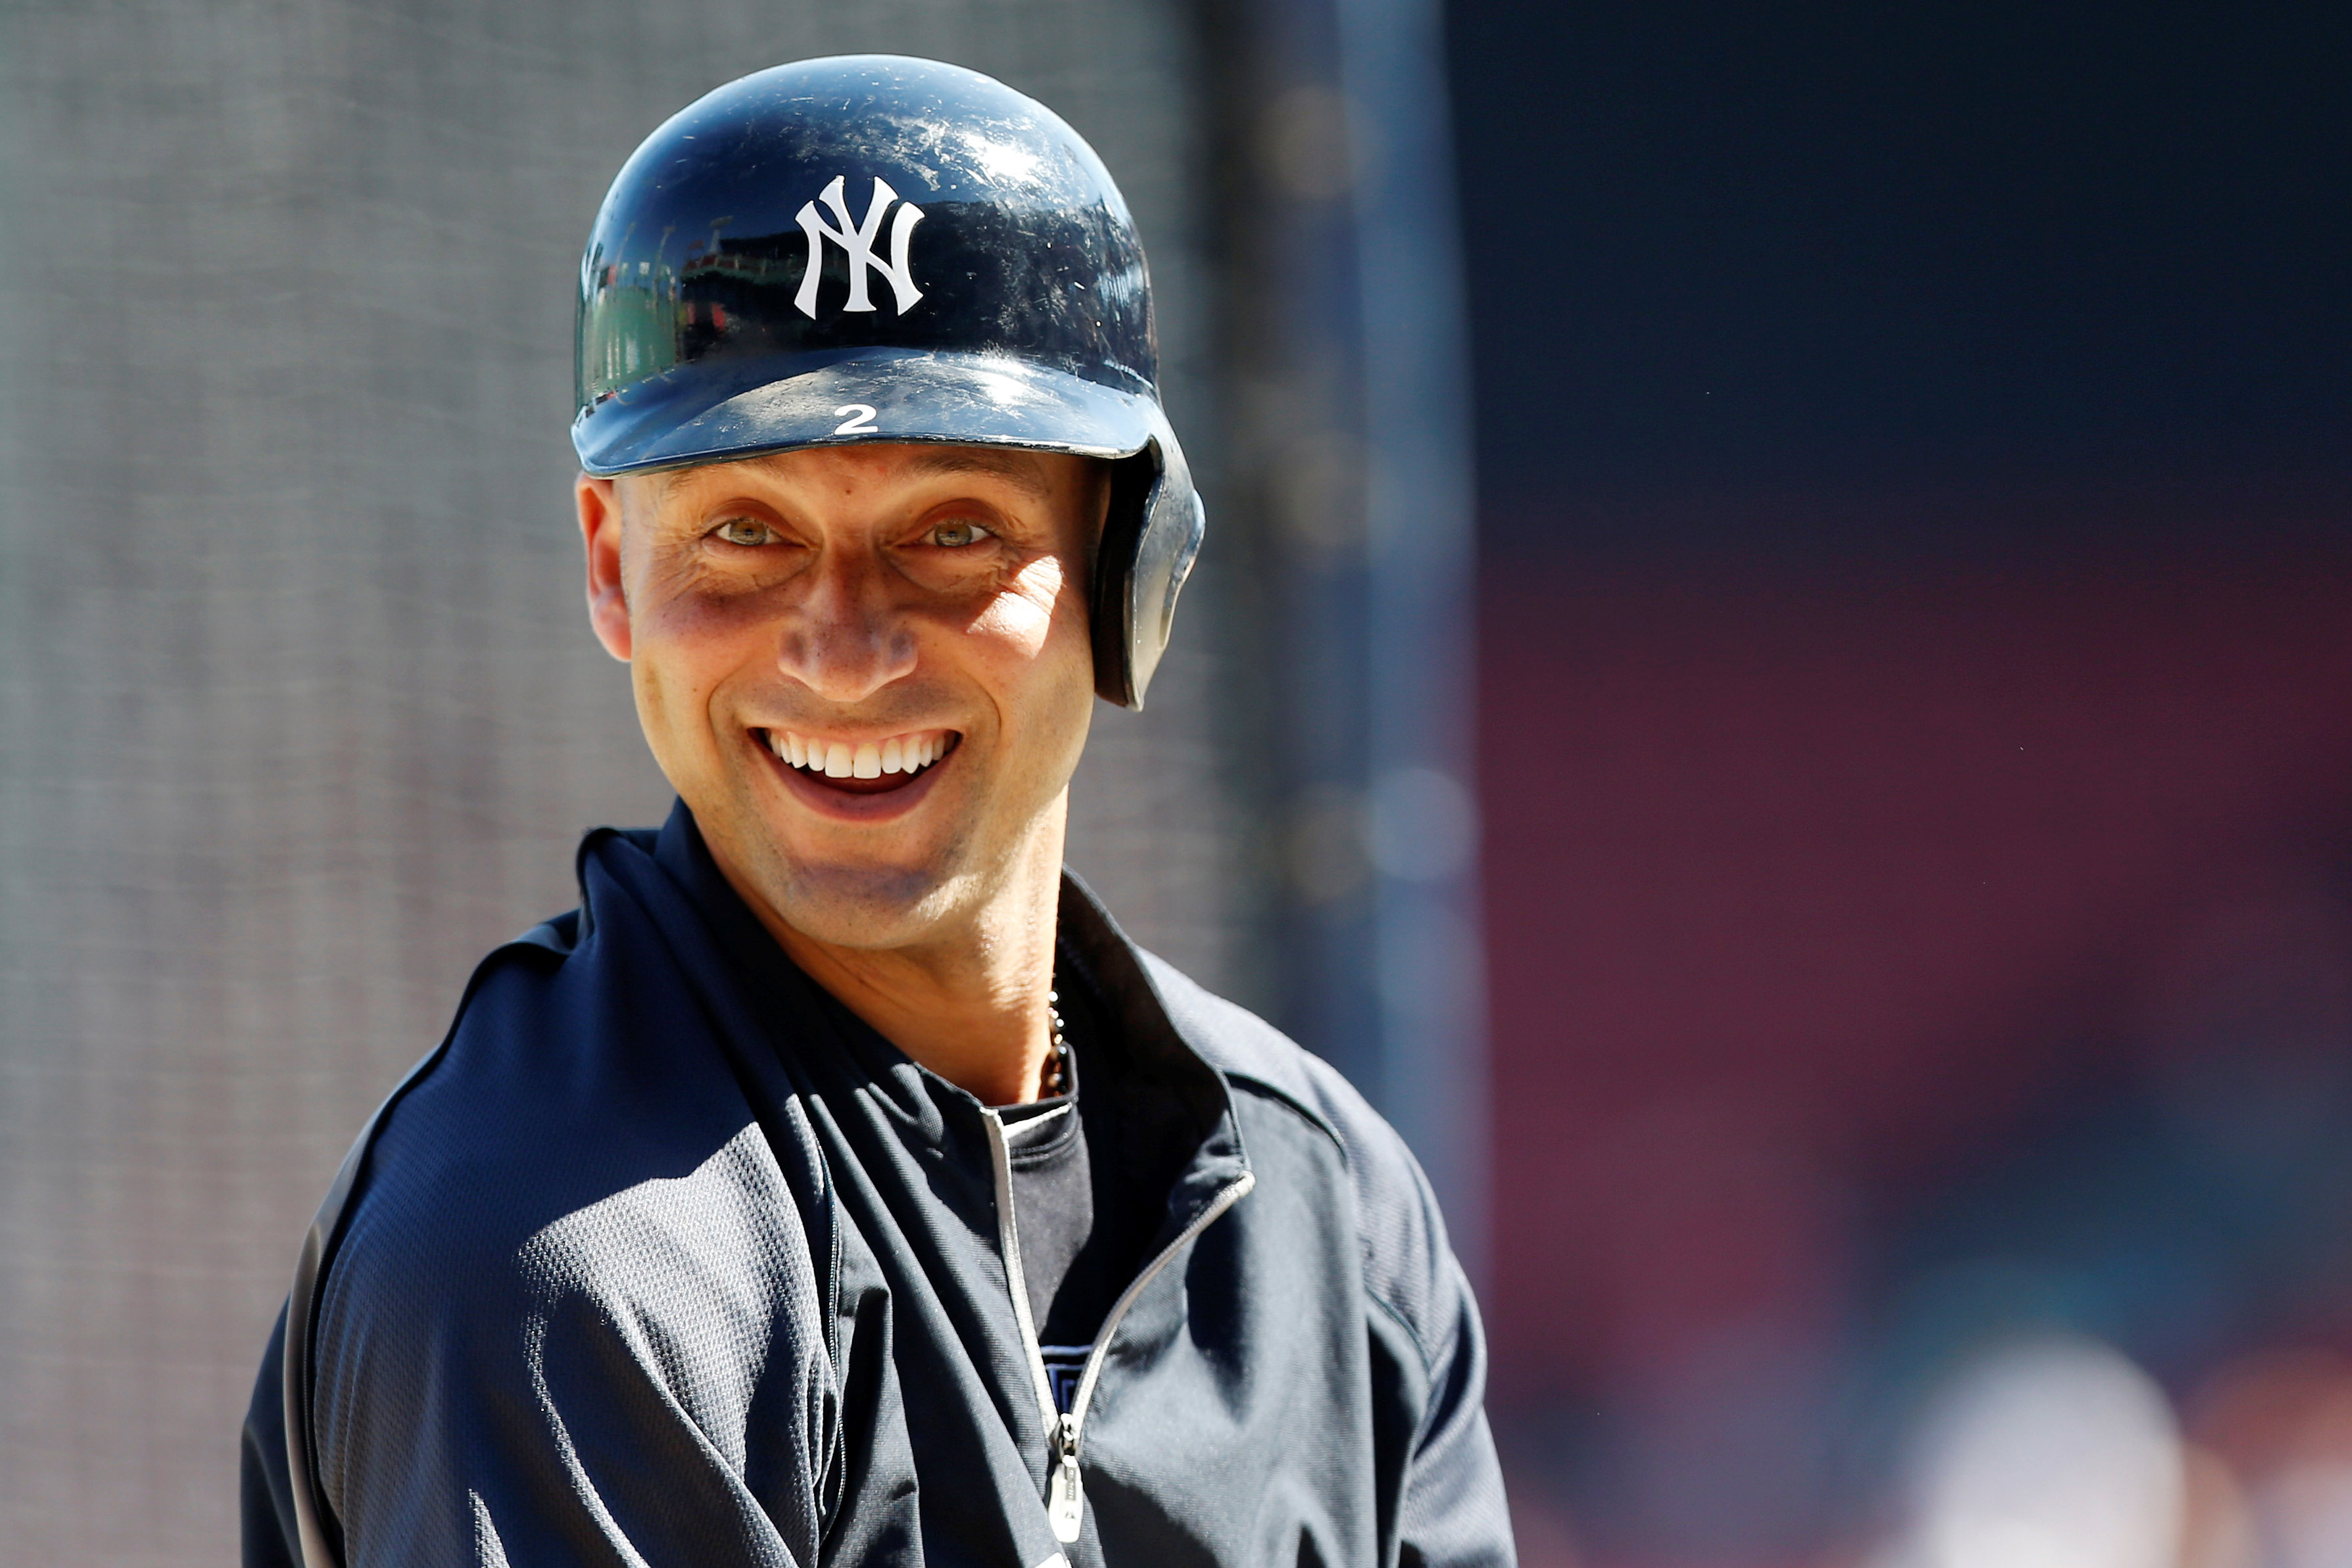 Sep 28, 2014; Boston, MA, USA; New York Yankees shortstop Derek Jeter (2) takes batting practice before the game against the Boston Red Sox at Fenway Park. Mandatory Credit: Greg M. Cooper-USA TODAY Sports ORG XMIT: USATSI-170130 ORIG FILE ID: 20140928_pjc_sj7_105.JPG